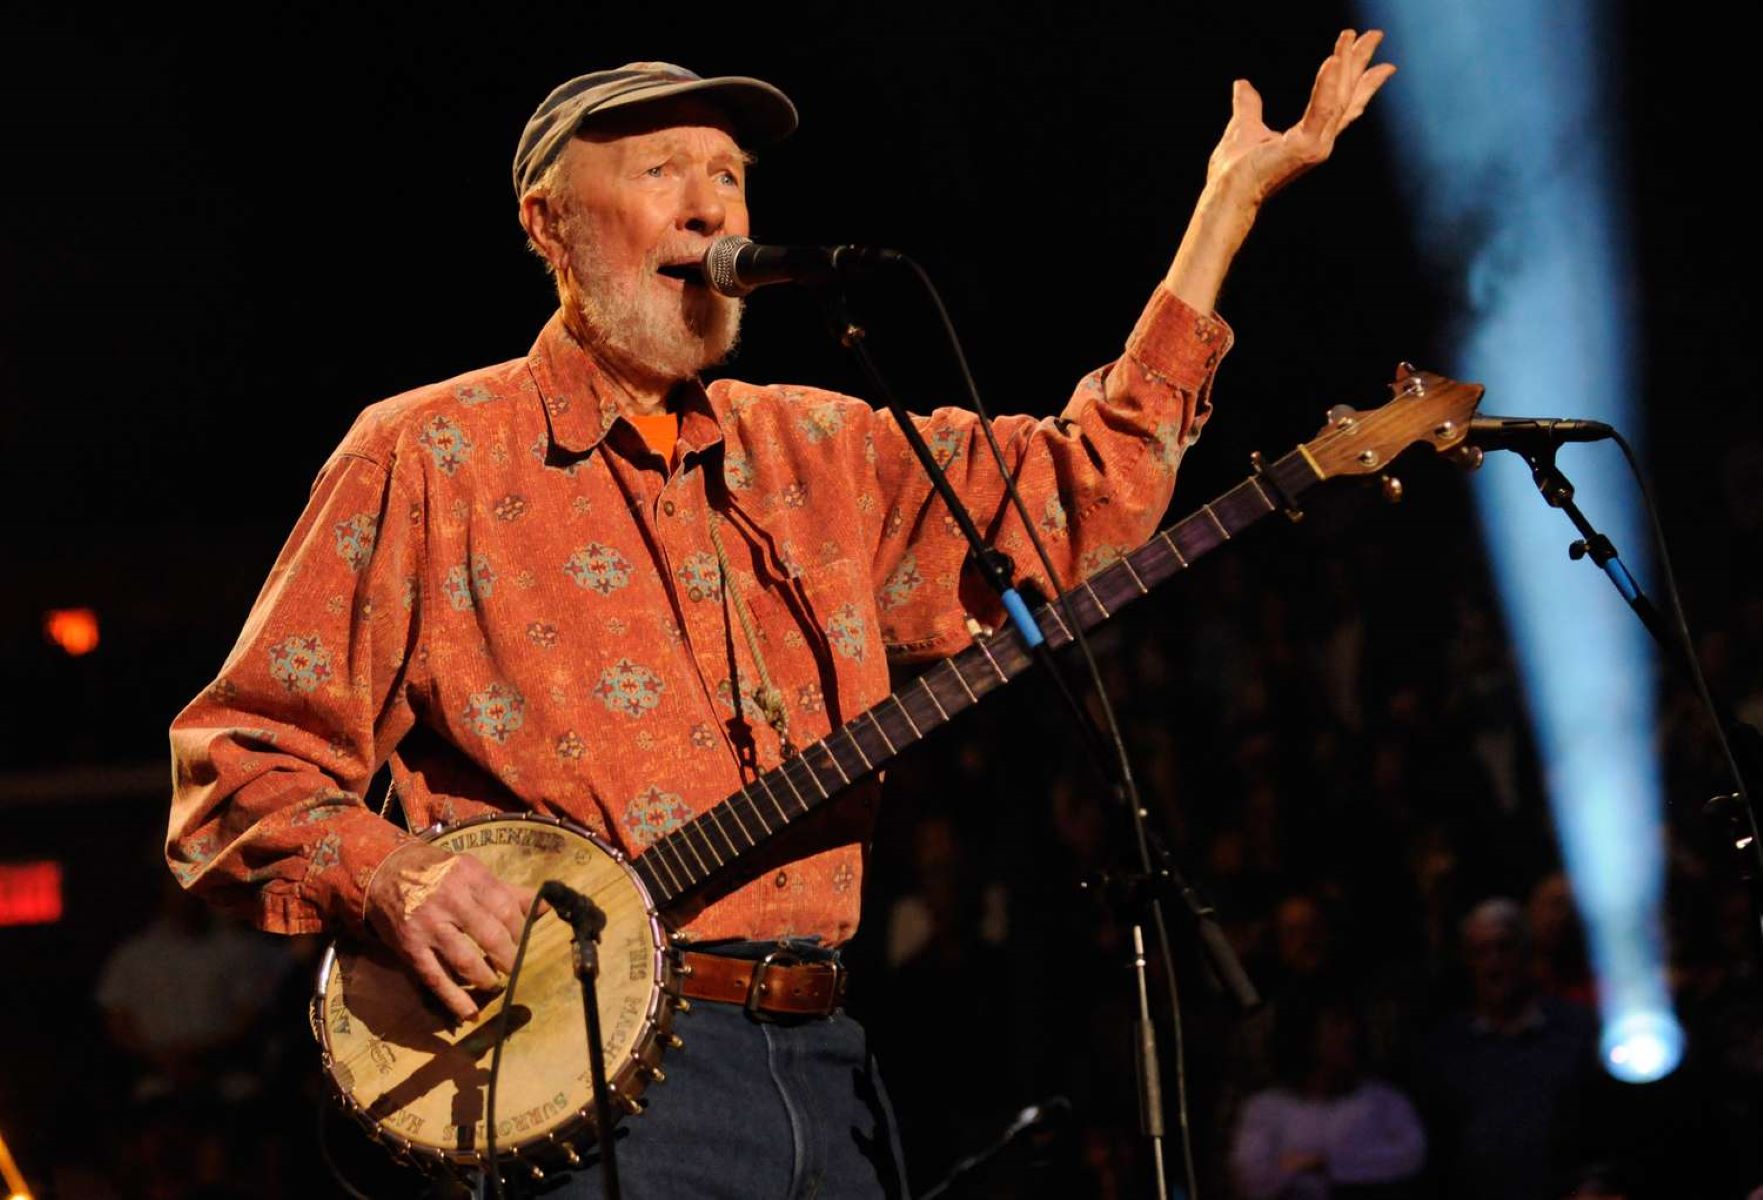 Which Group Was Lead By Folk Music Legend Pete Seeger?